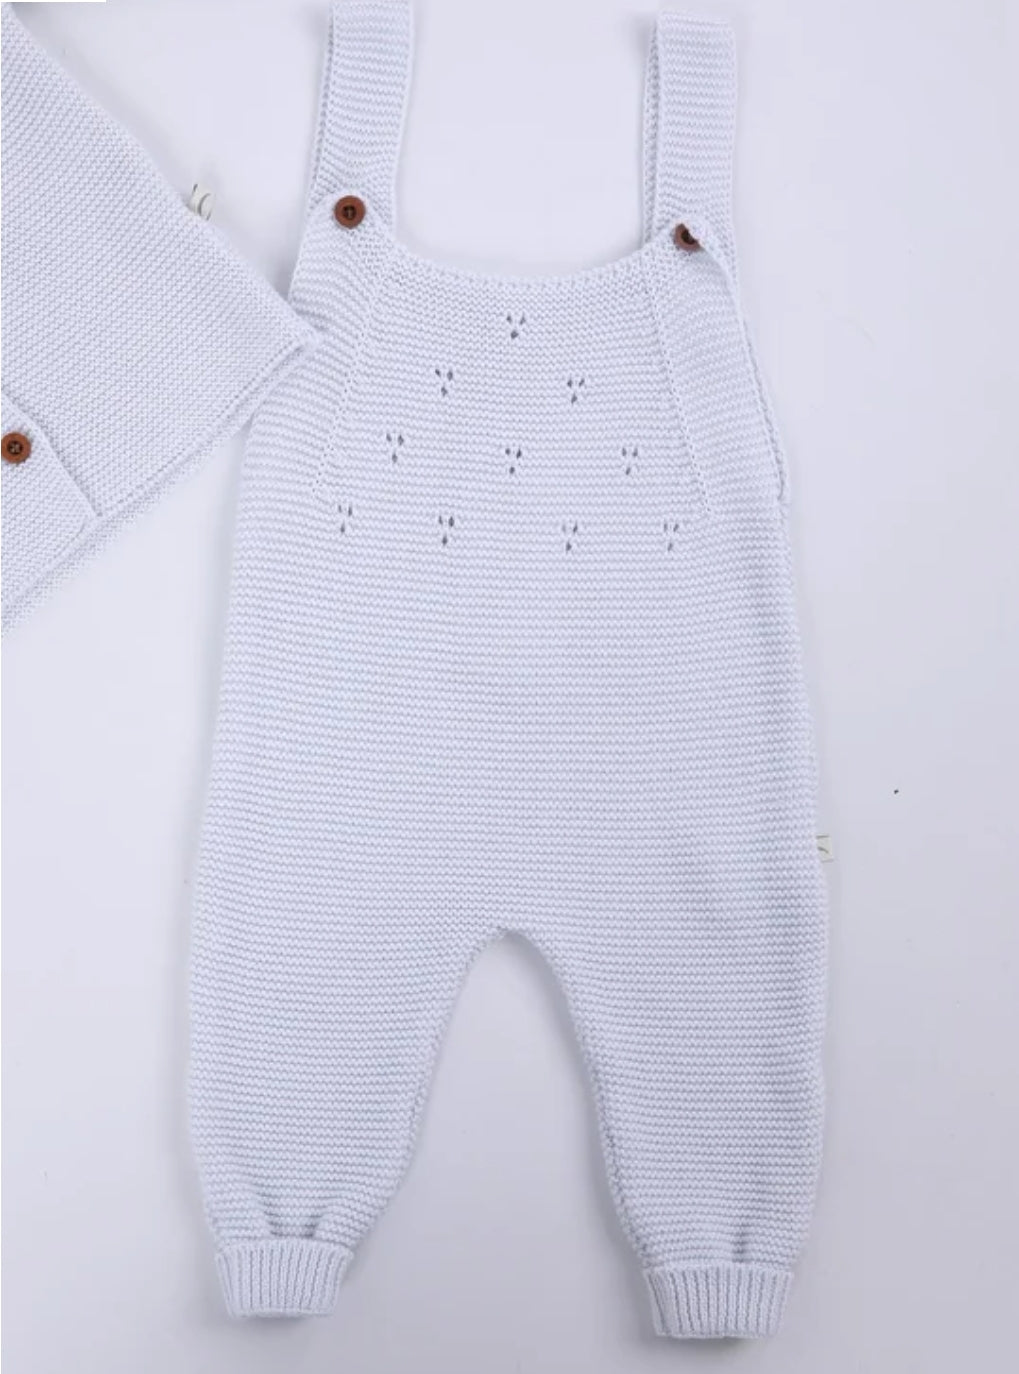 Organic Little One Knitted Dungaree & Cardigan Set -Pastel Blue